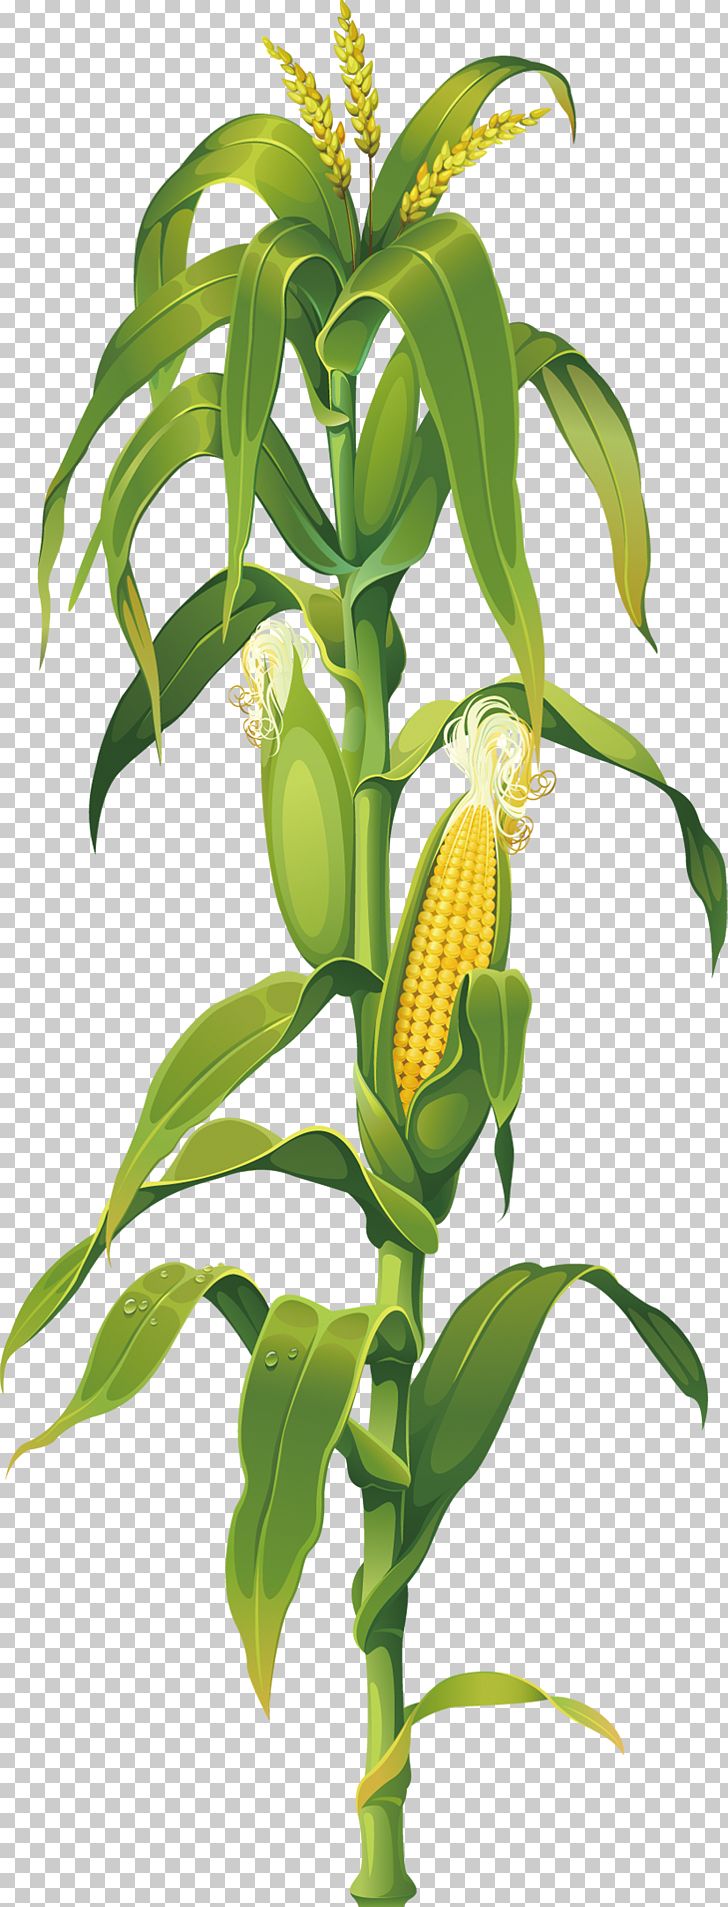 Maize Corn On The Cob Drawing Plant PNG, Clipart, Branch, Cartoon Corn, Cereal, Cobs, Commodity Free PNG Download